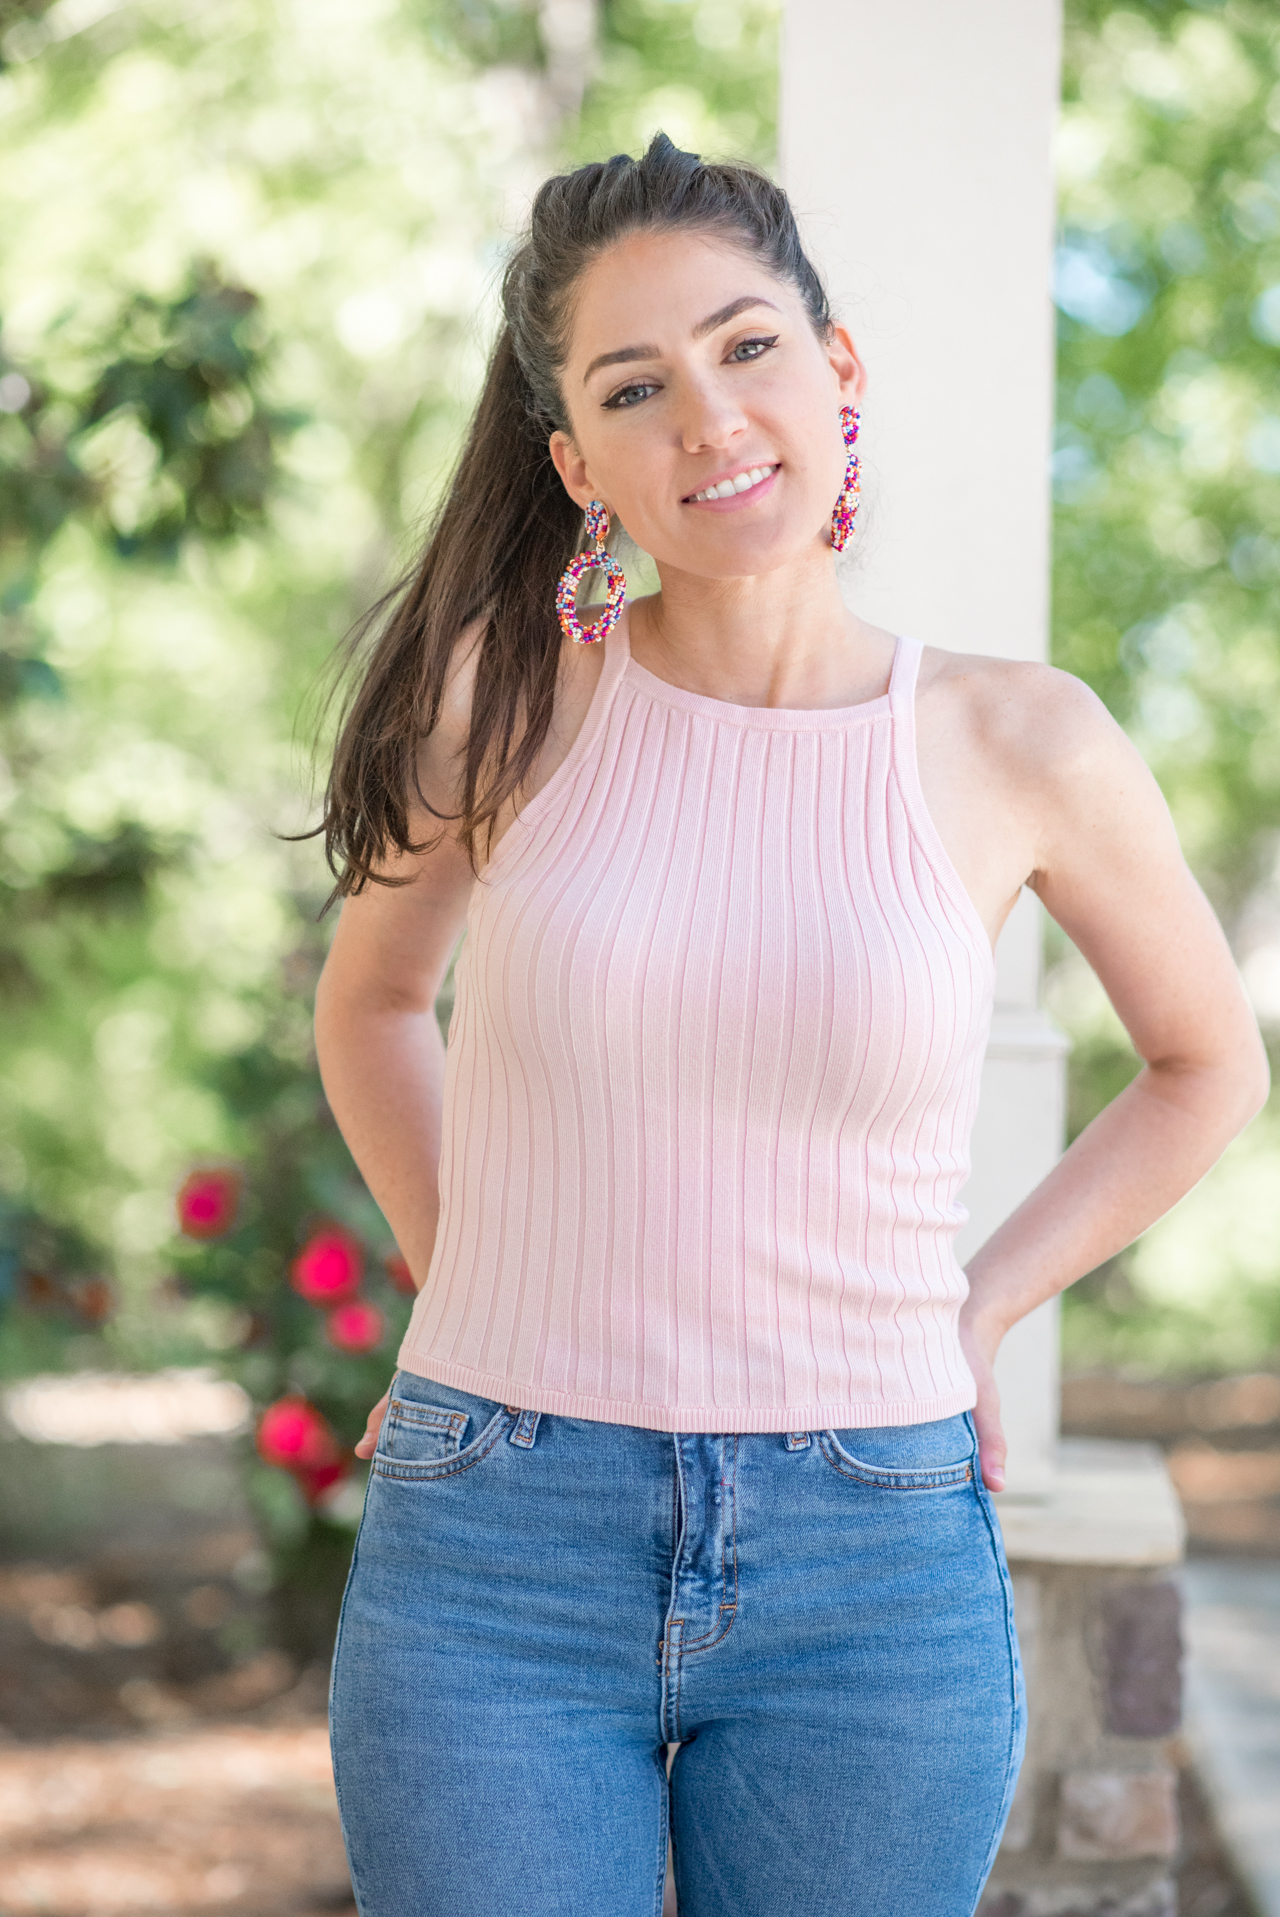 Atlanta Style Blogger, Casual Weekend Style, jeans, lookbook, outfit ideas, spring outfit ideas, Pink cropped Sweater Tank, ootd, outfit of the day, style blogger, atlanta blogger, fashion blogger